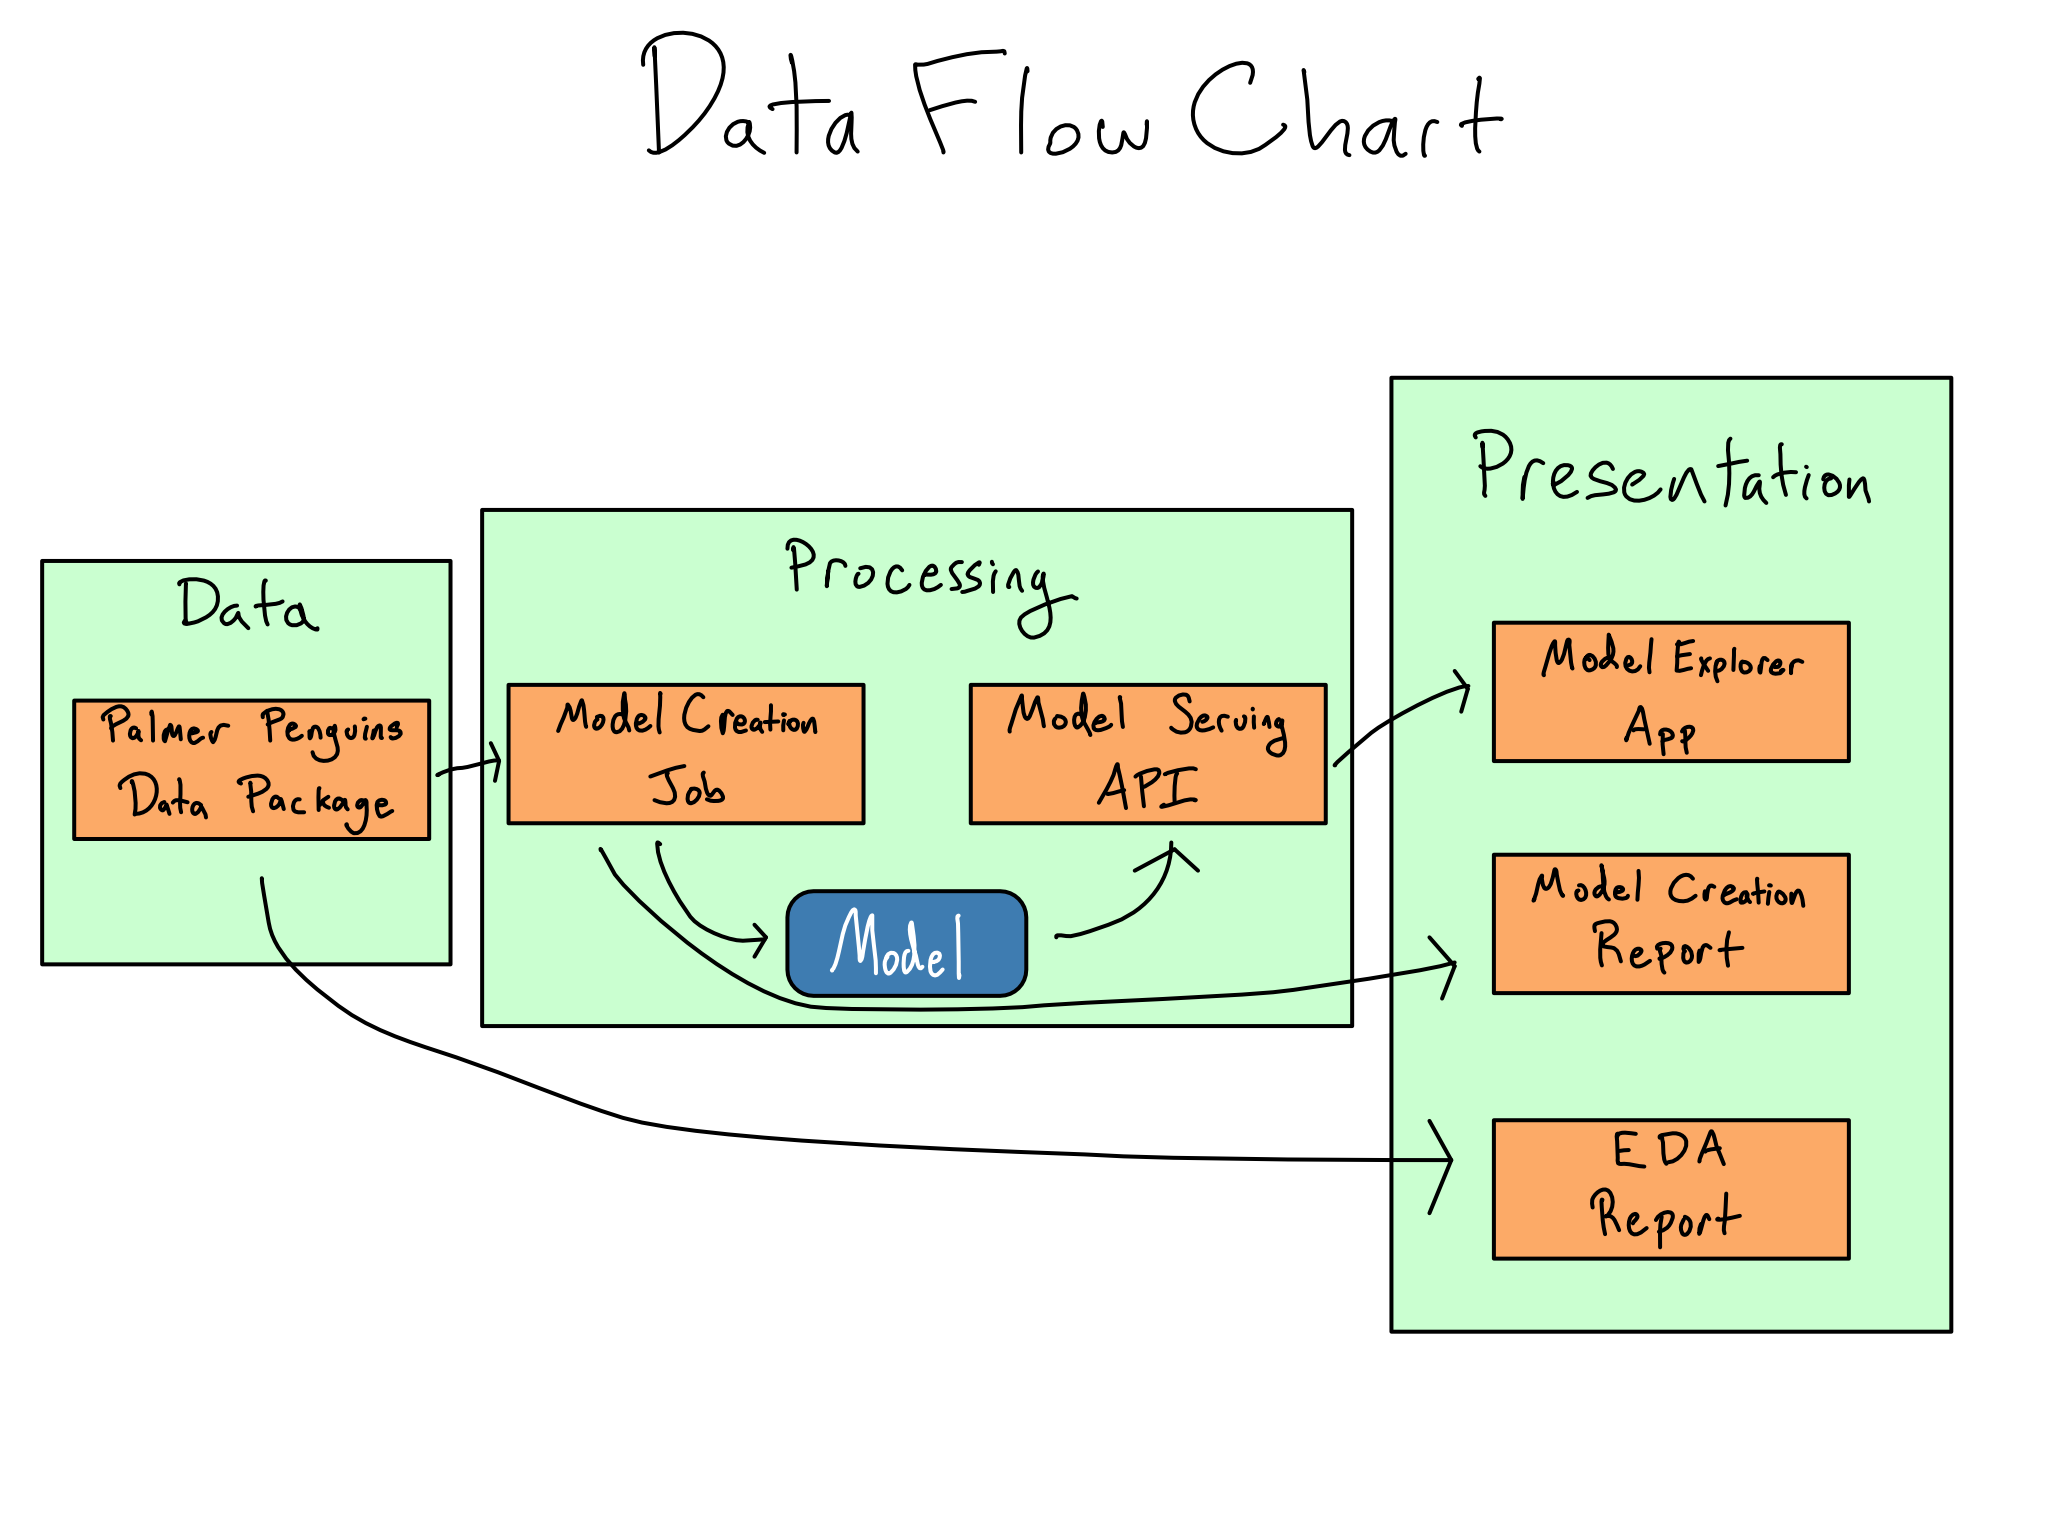 A data flow chart showing how the palmer penguins data flows into the model creation API, which creates the model and the model creation report. The model serving API uses the model and feeds the model explorer API.